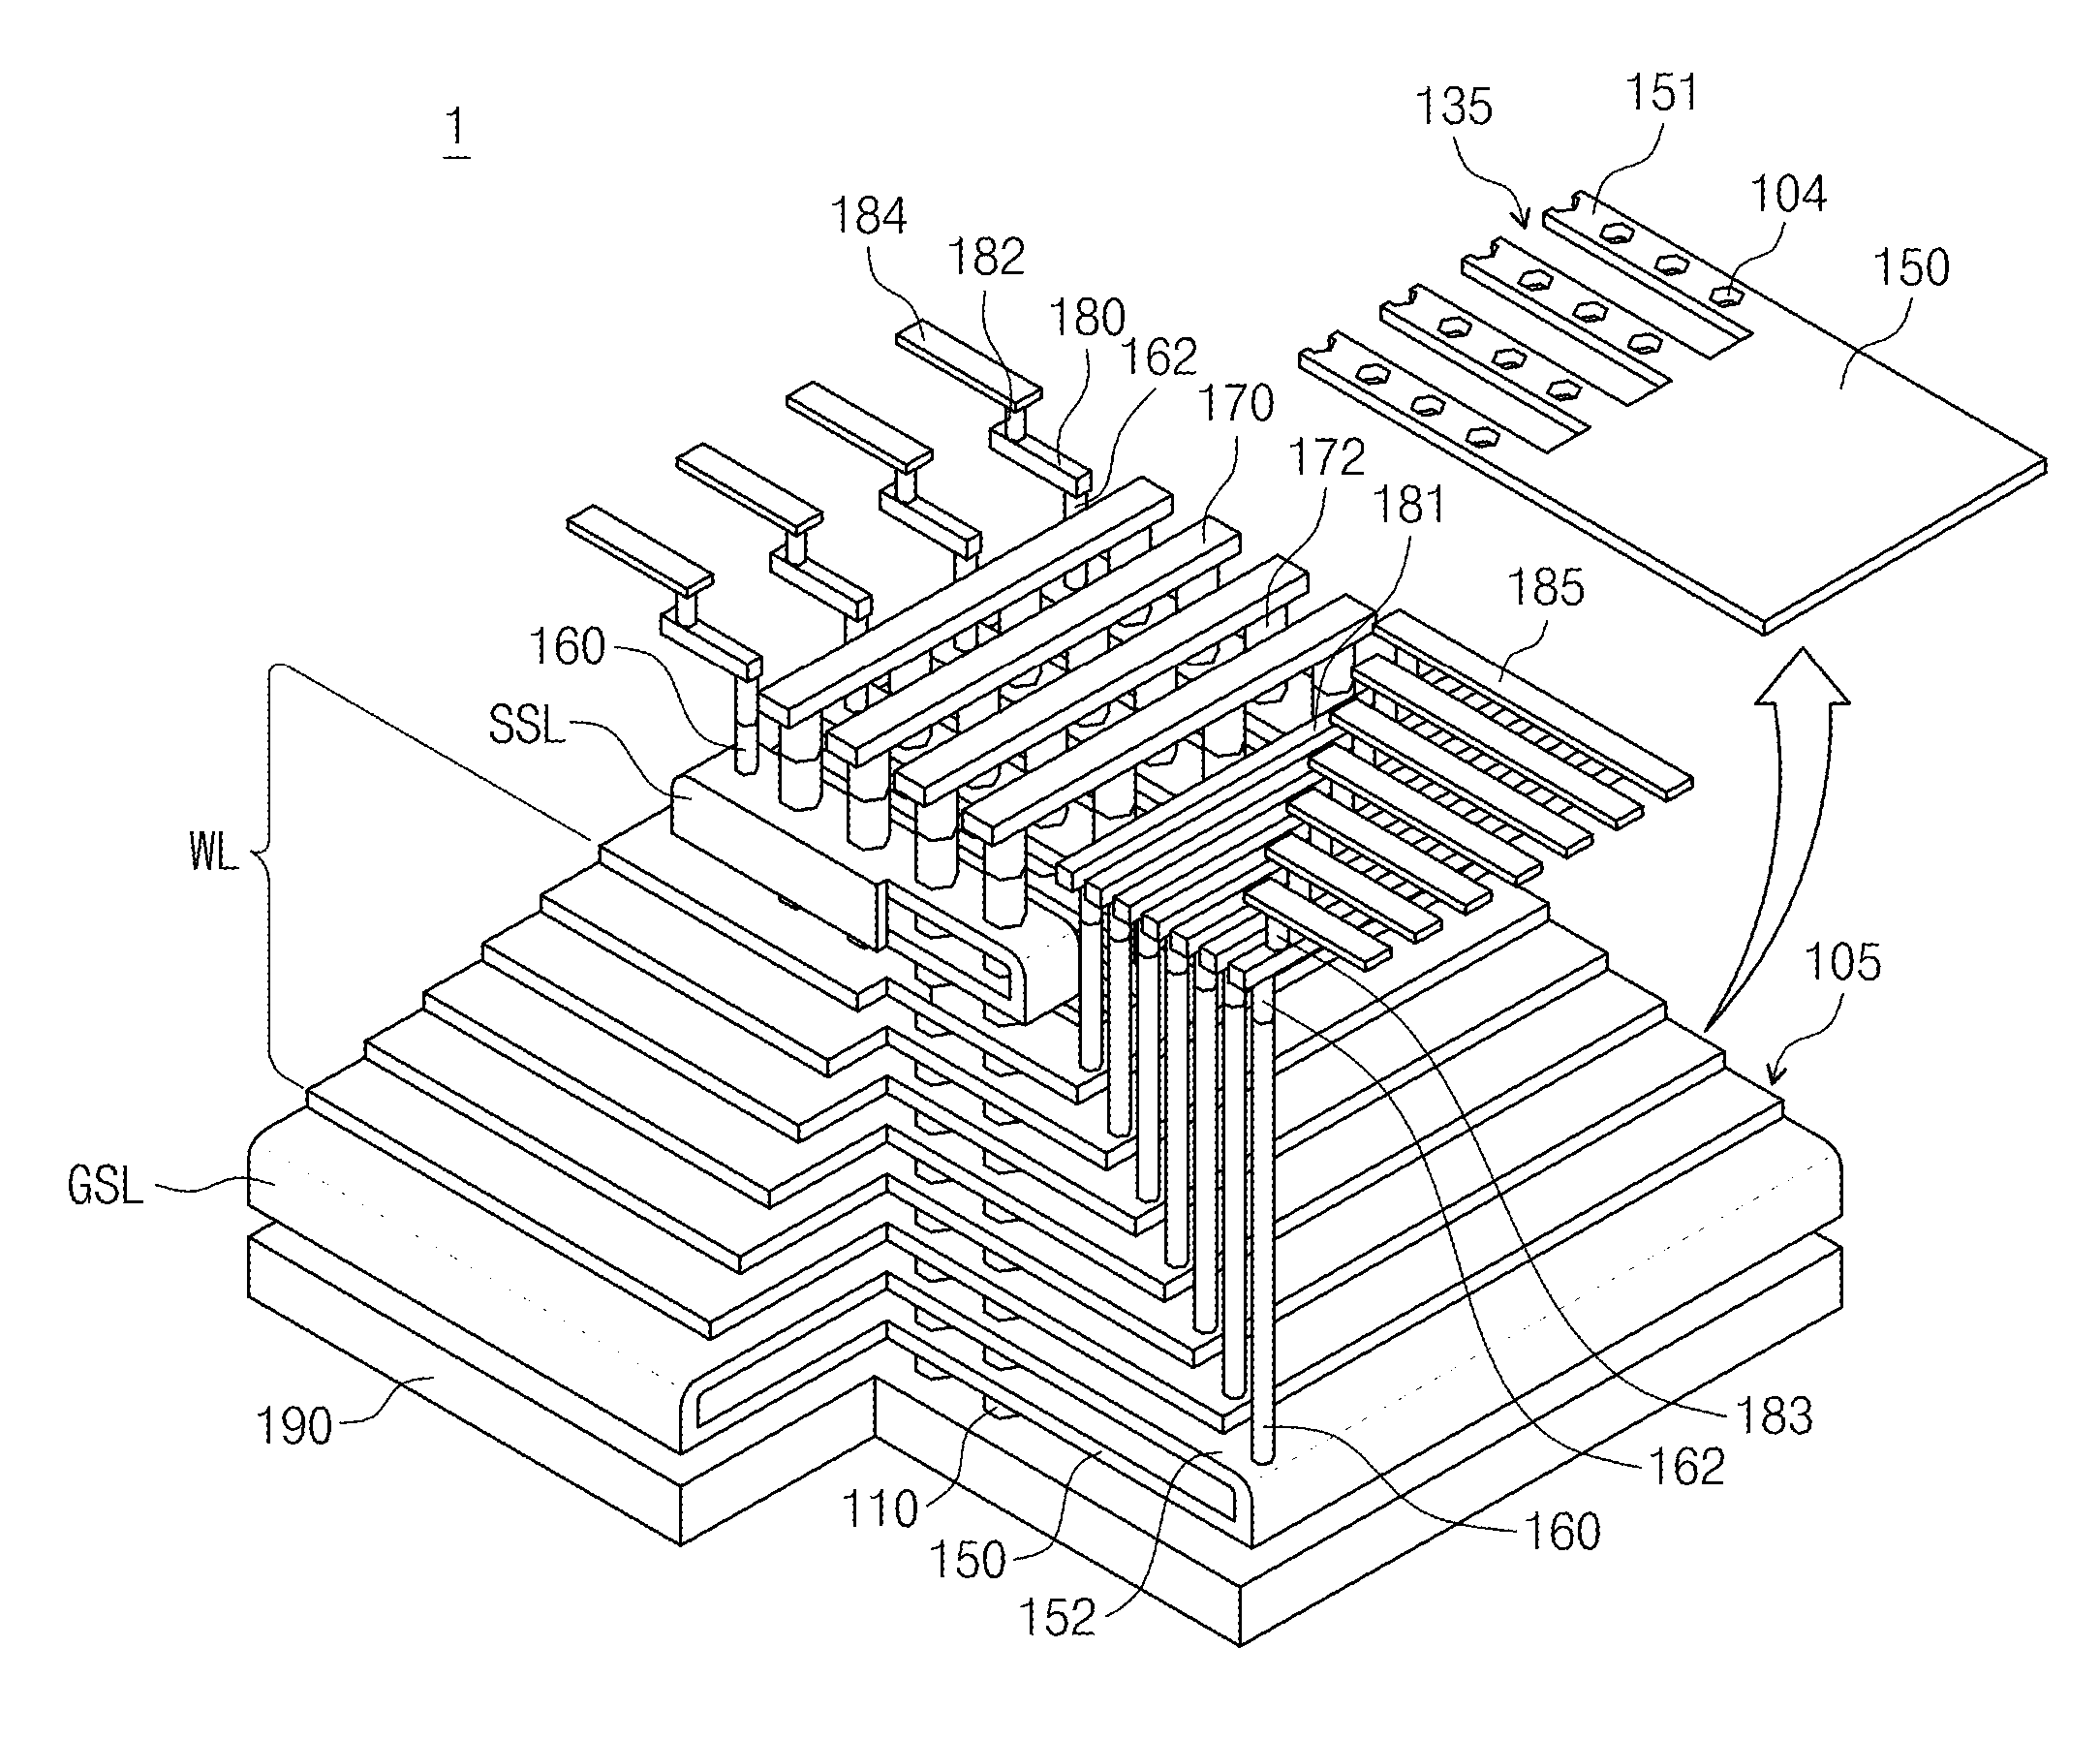 3D semiconductor devices and methods of fabricating same